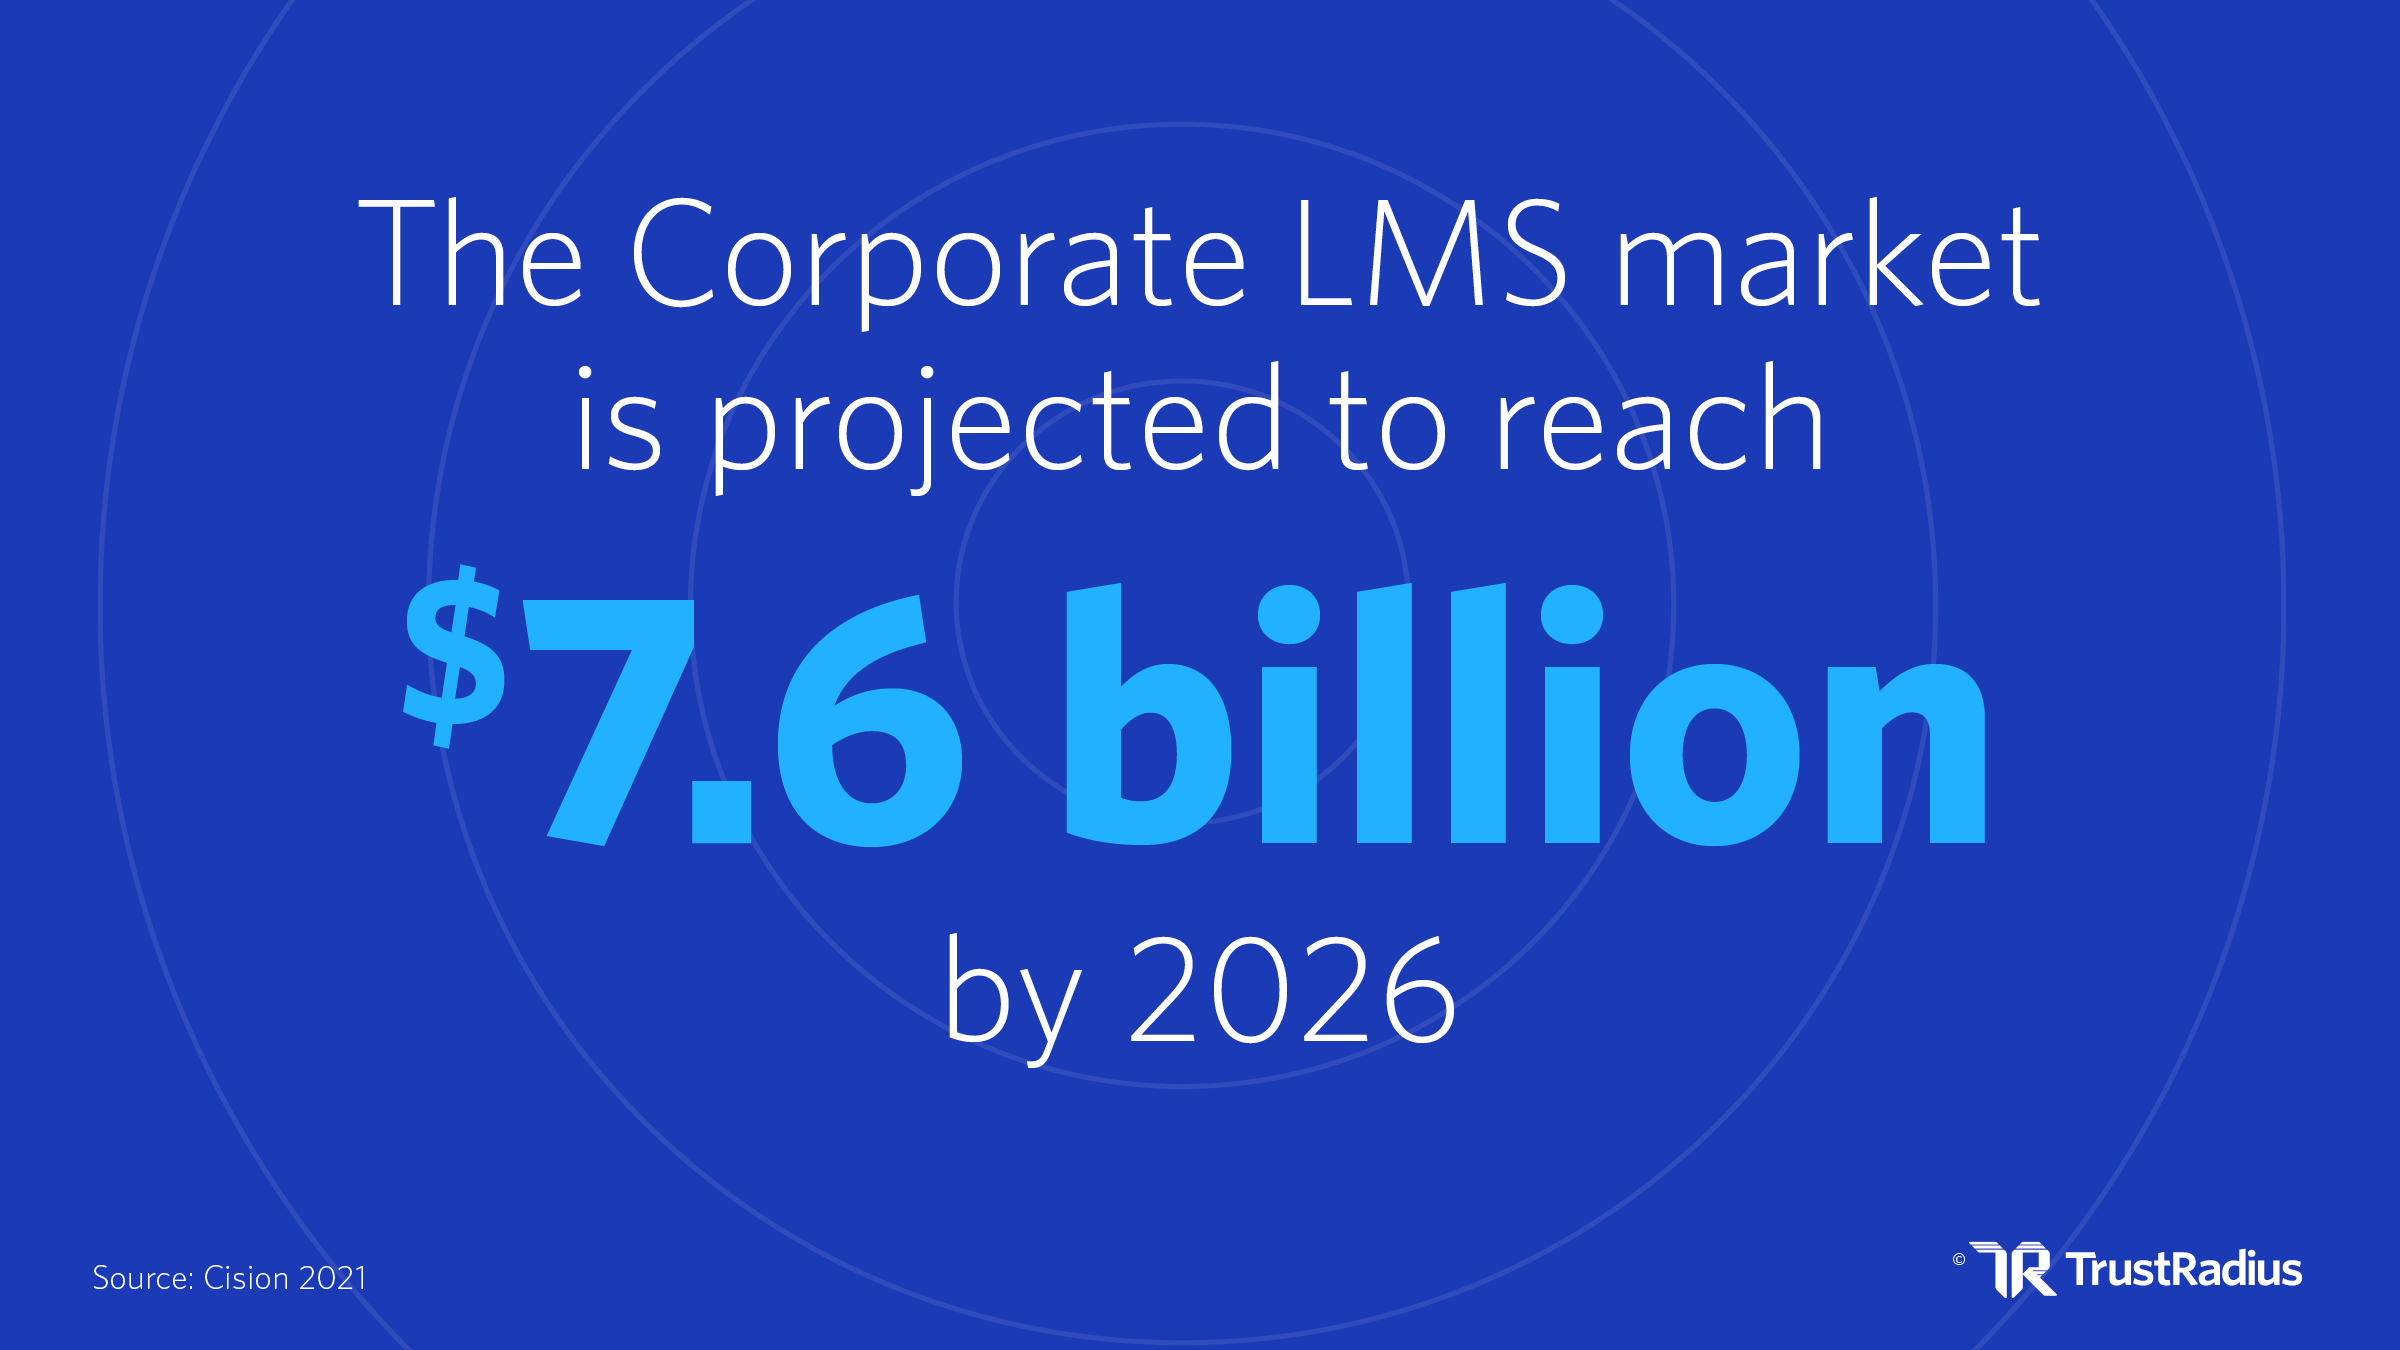 The corporate LMS market is projected to reach 7.6 billion by 2026